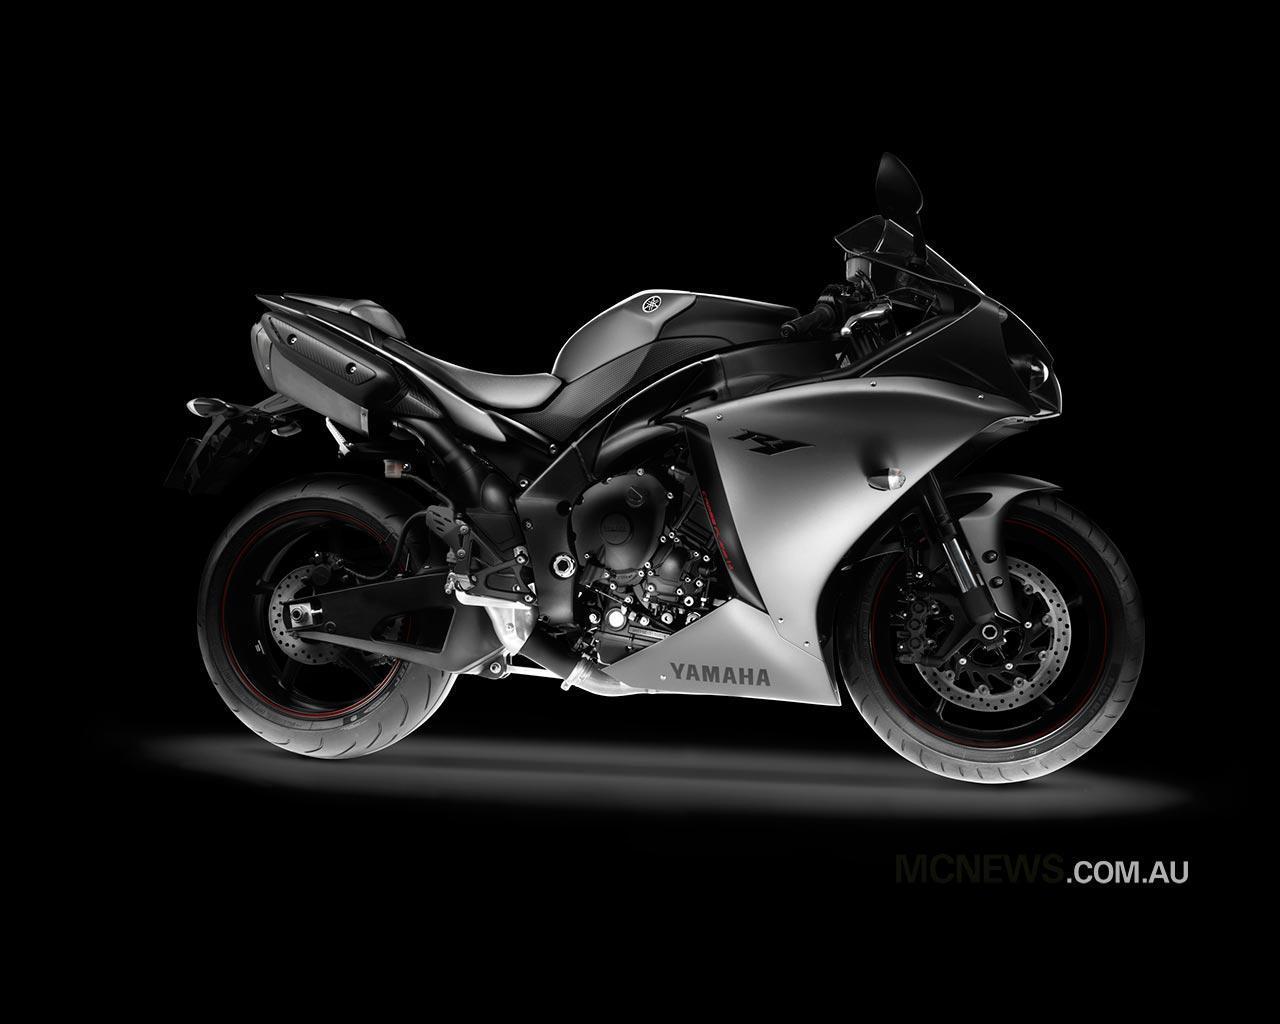 Yamaha r1 Wallpaper. Piccry.com: Picture Idea Gallery